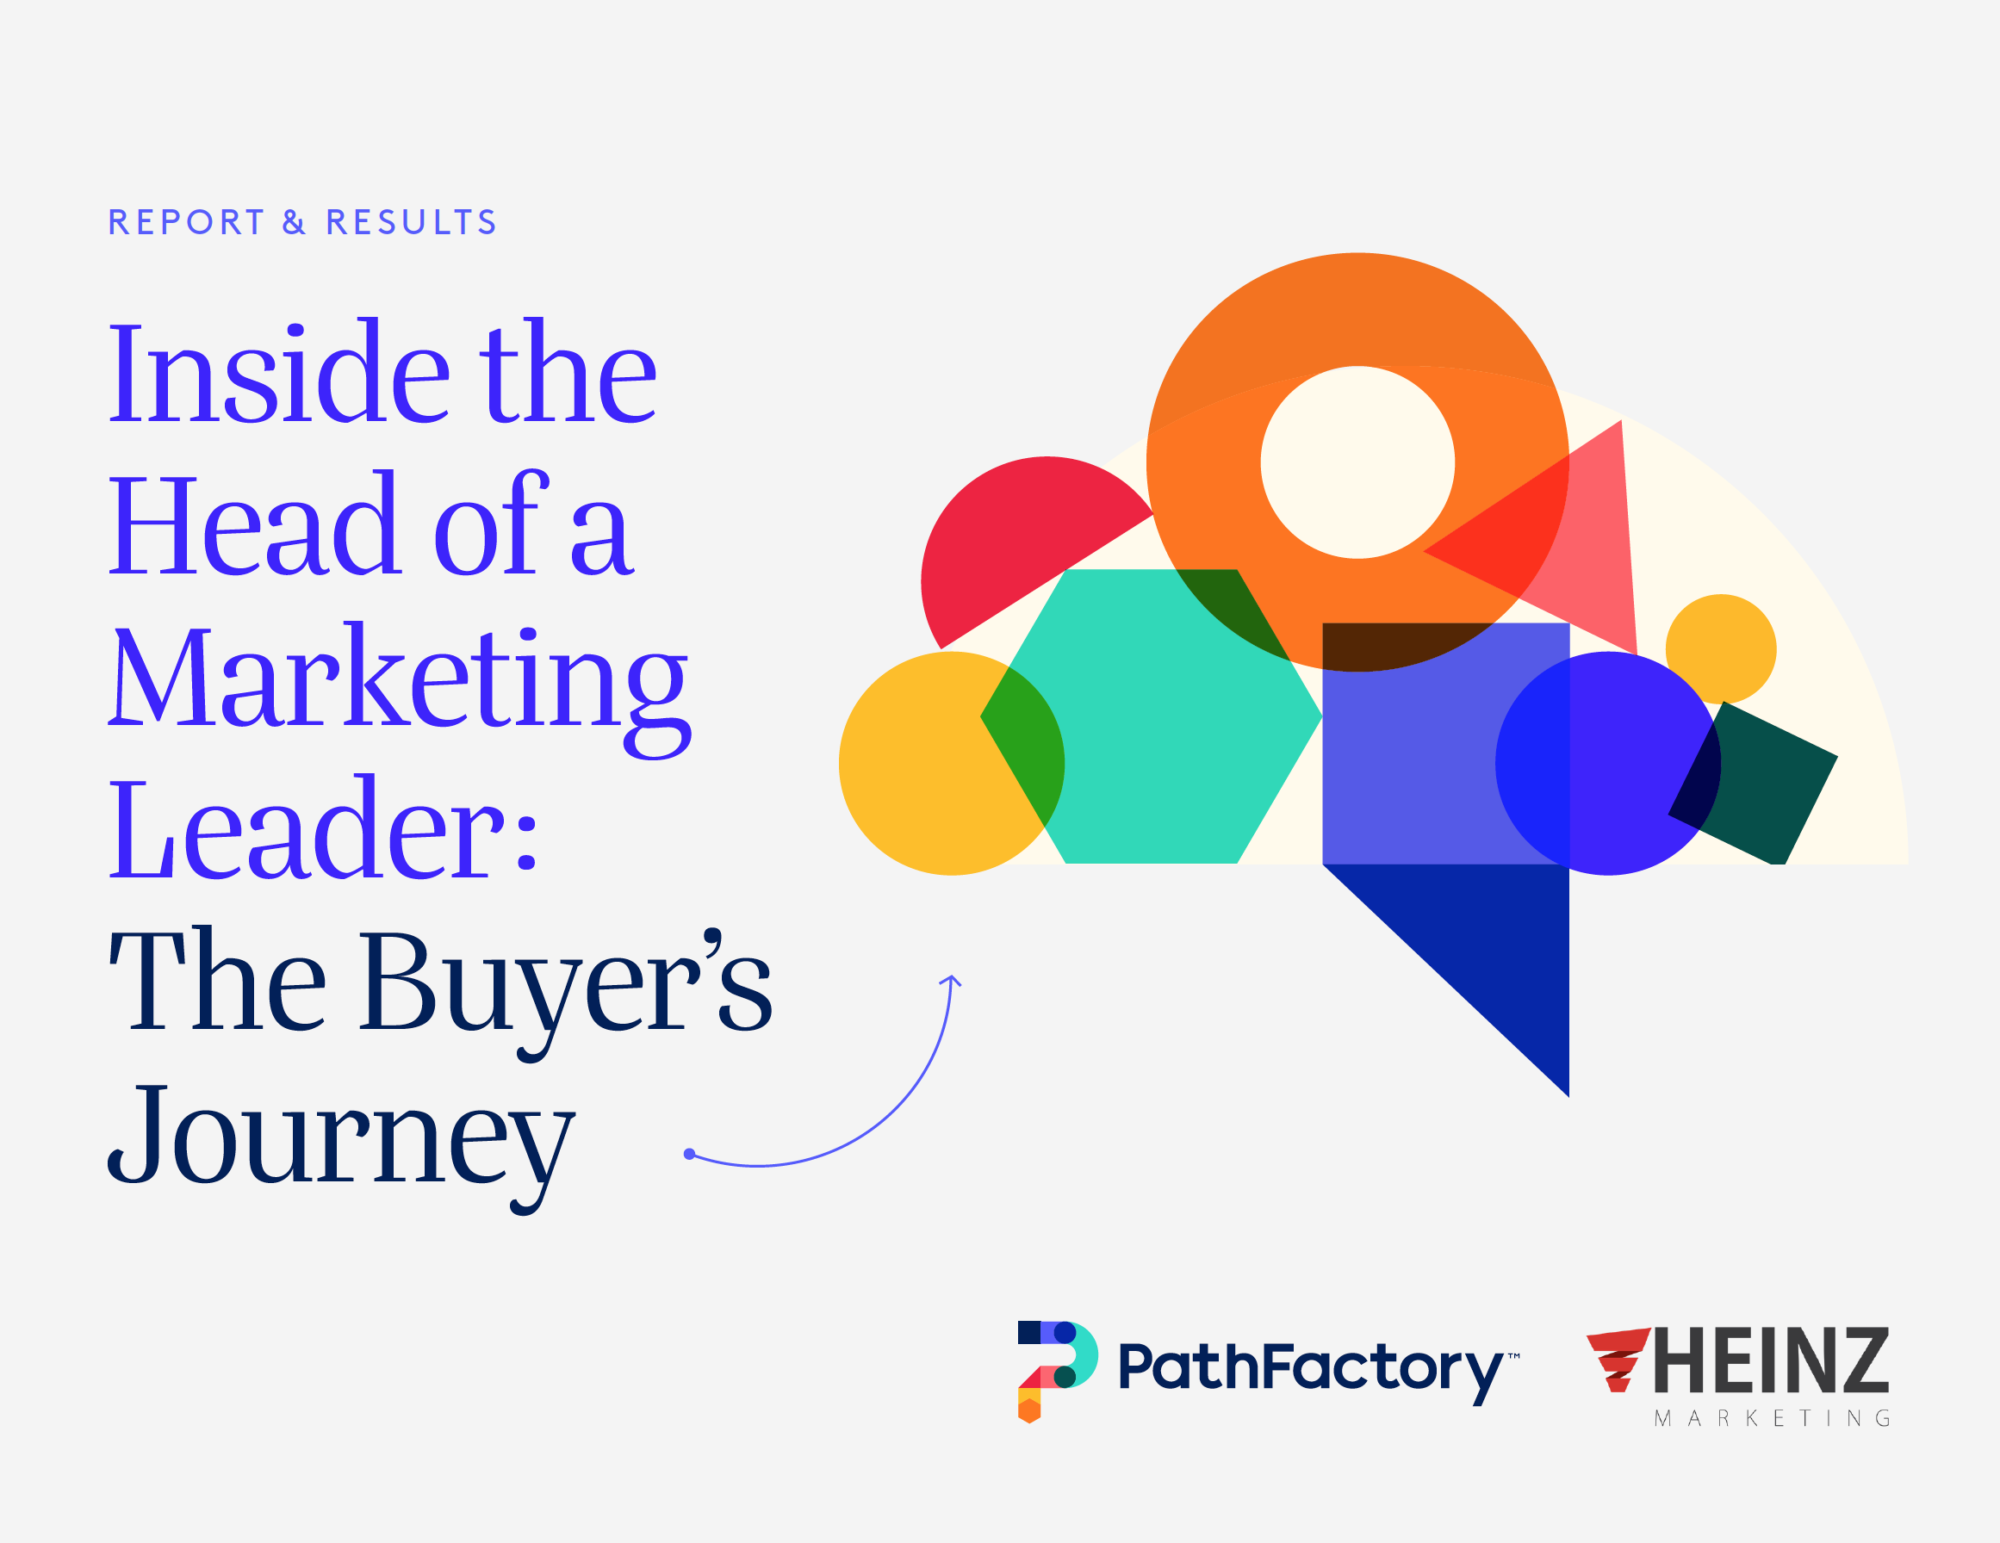 Report & Results: Inside the Head of a Marketing Leader: The Buyer's Journey, with a PathFactory and Heinz Marketing Logo on the bottom right